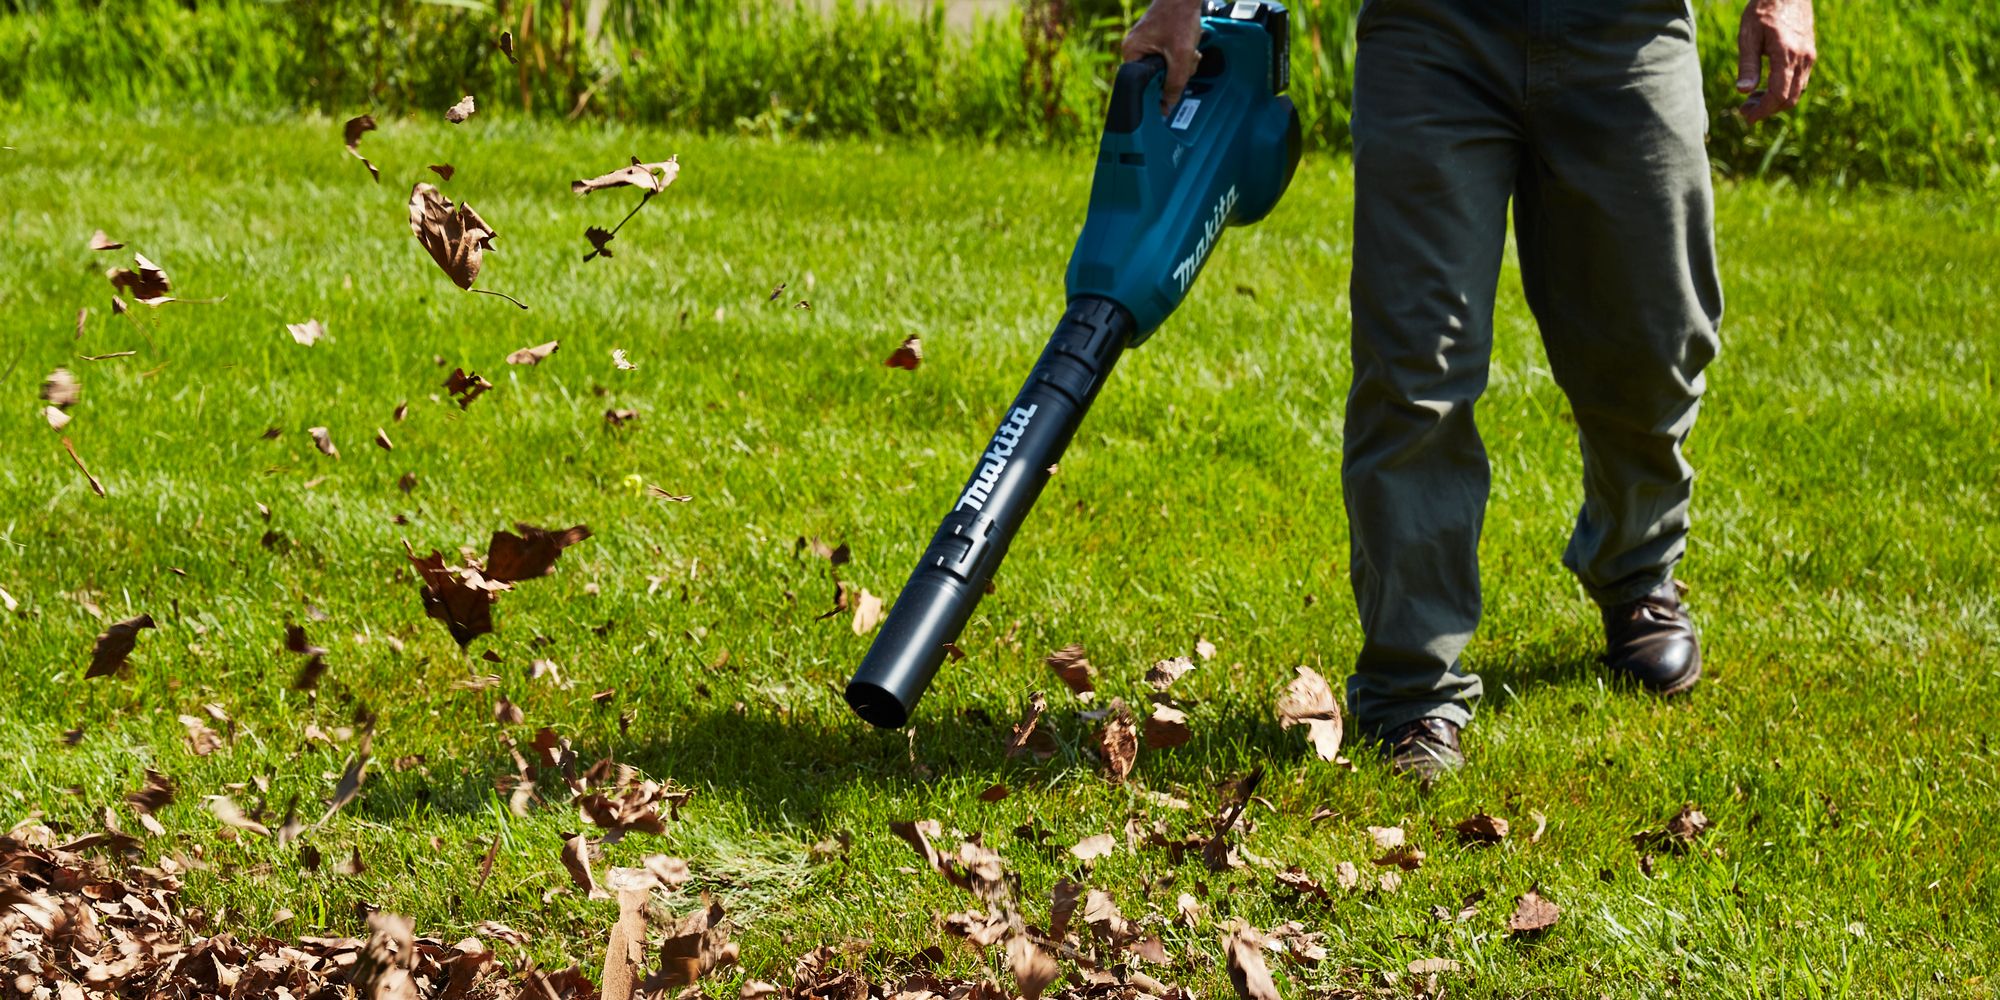 The Rake vs the Leaf Blower: Which Is Better? - Gardenista